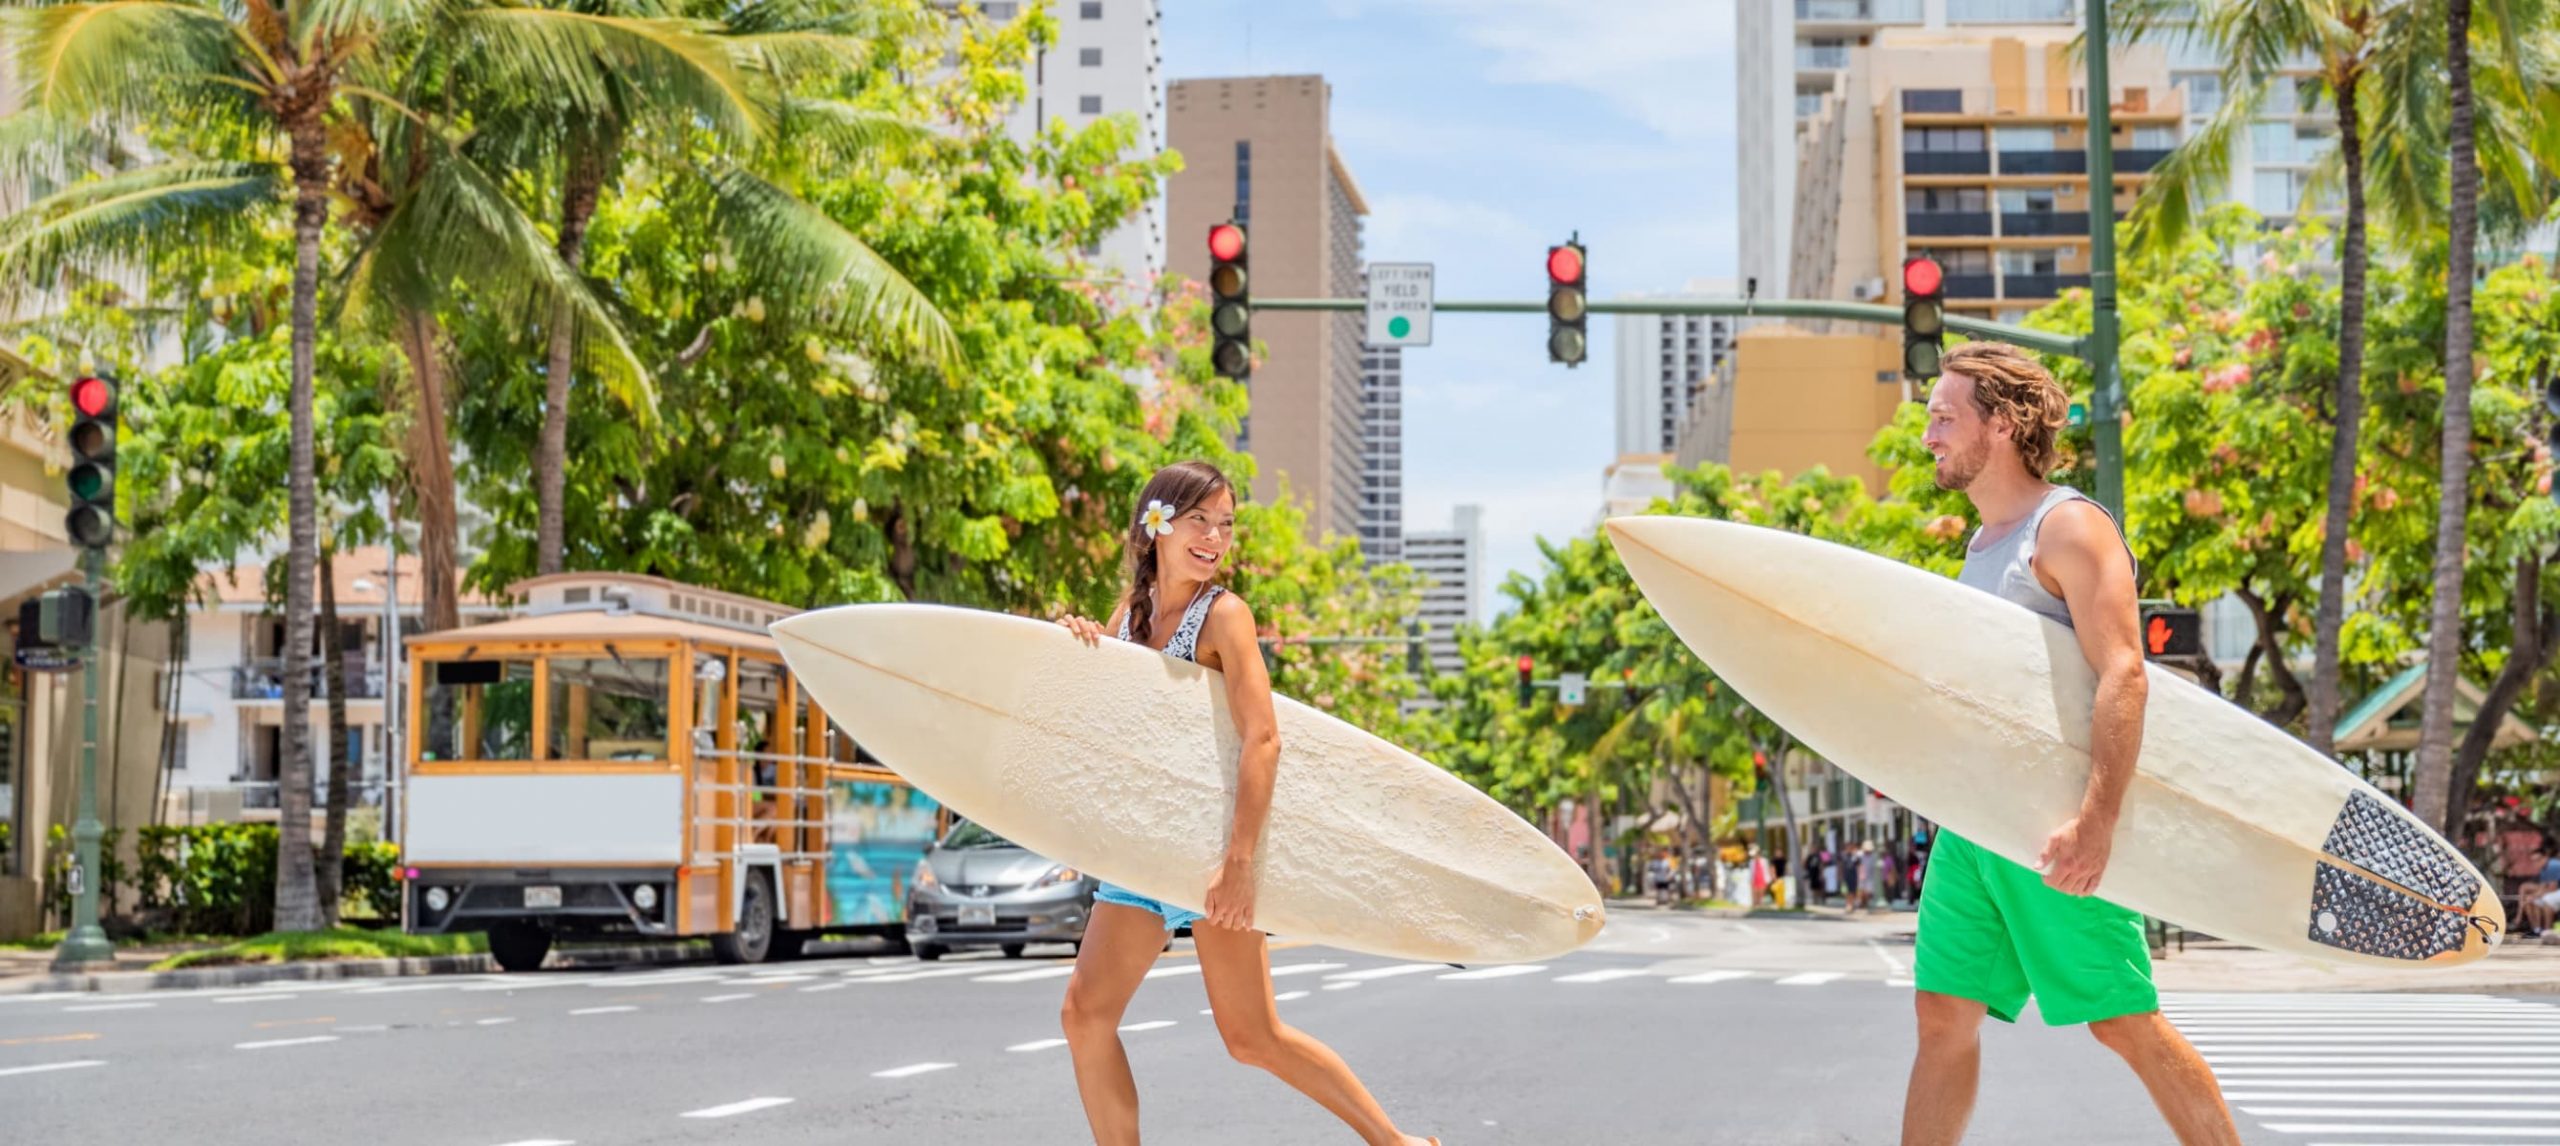 9 Most Amazing Things To Do In Honolulu, Hawaii